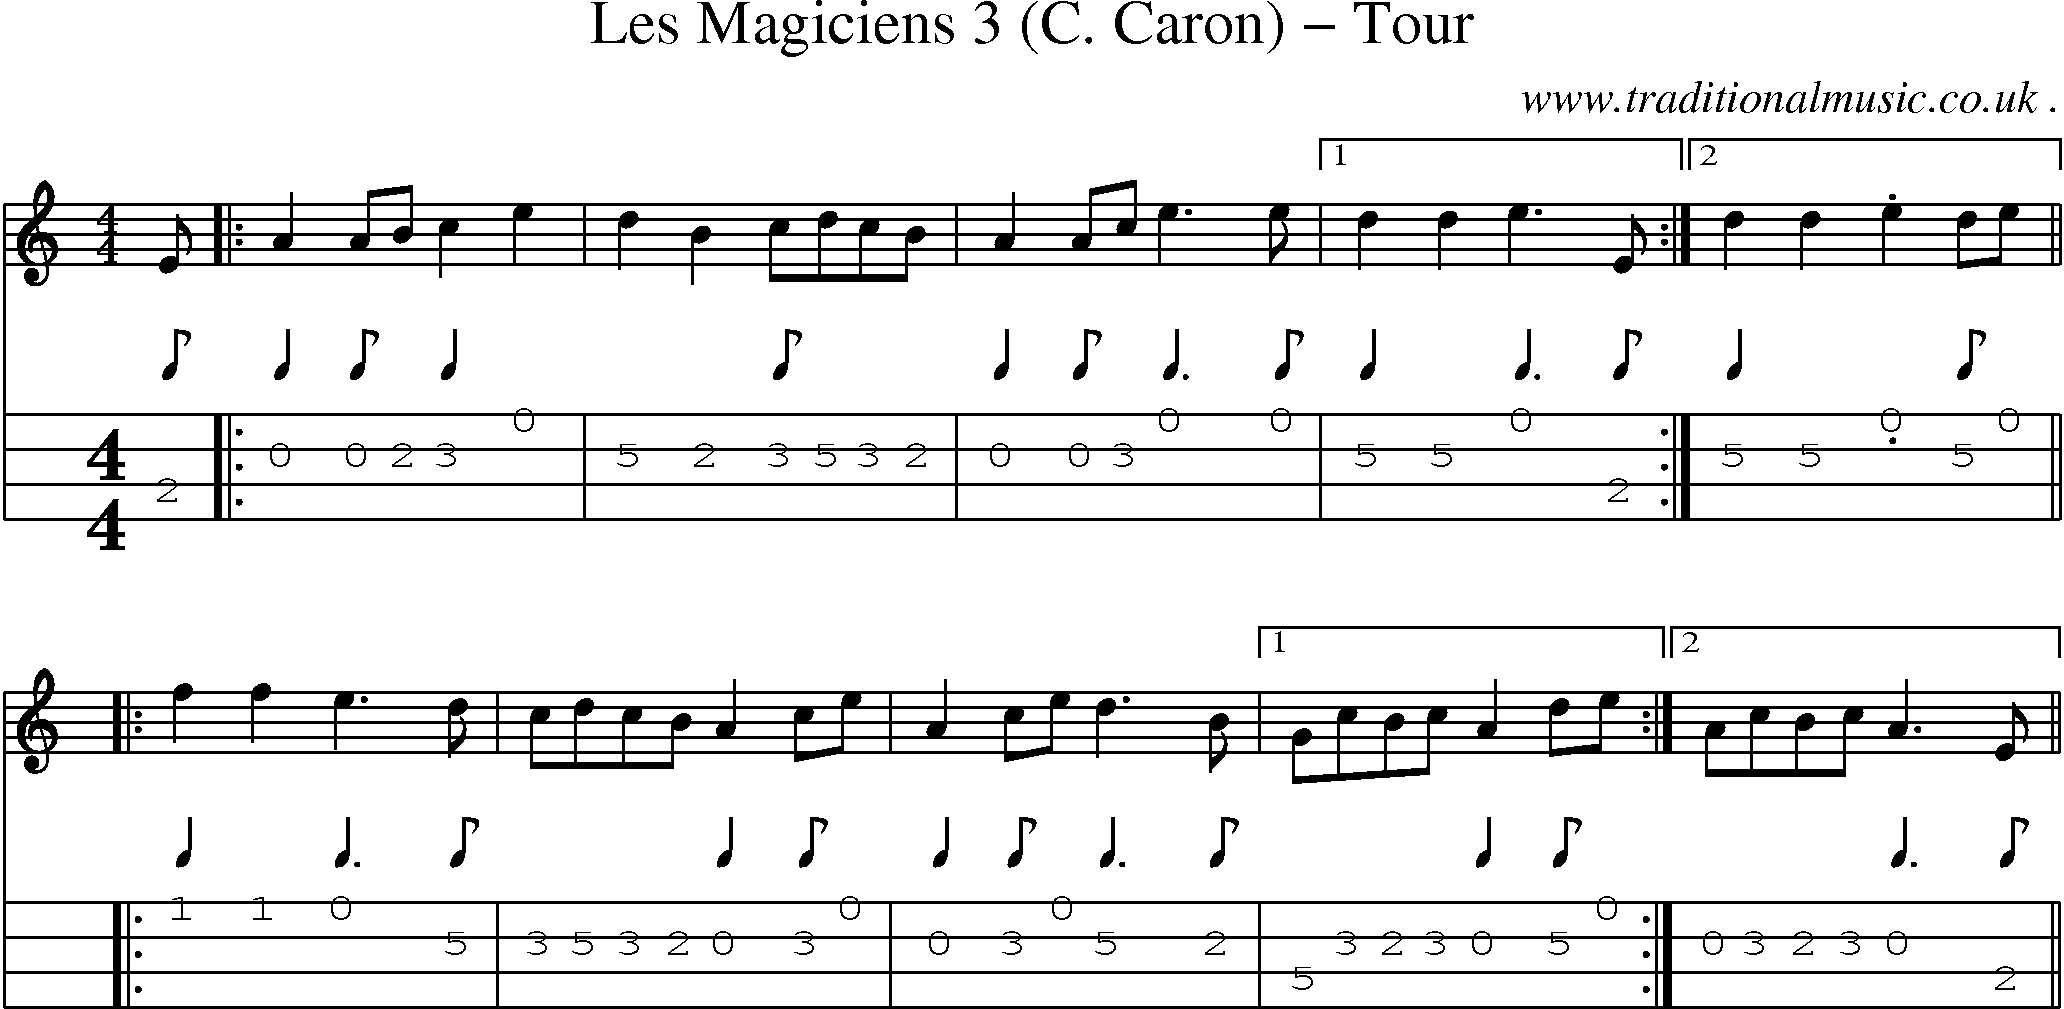 Sheet-Music and Mandolin Tabs for Les Magiciens 3 (c Caron) Tour